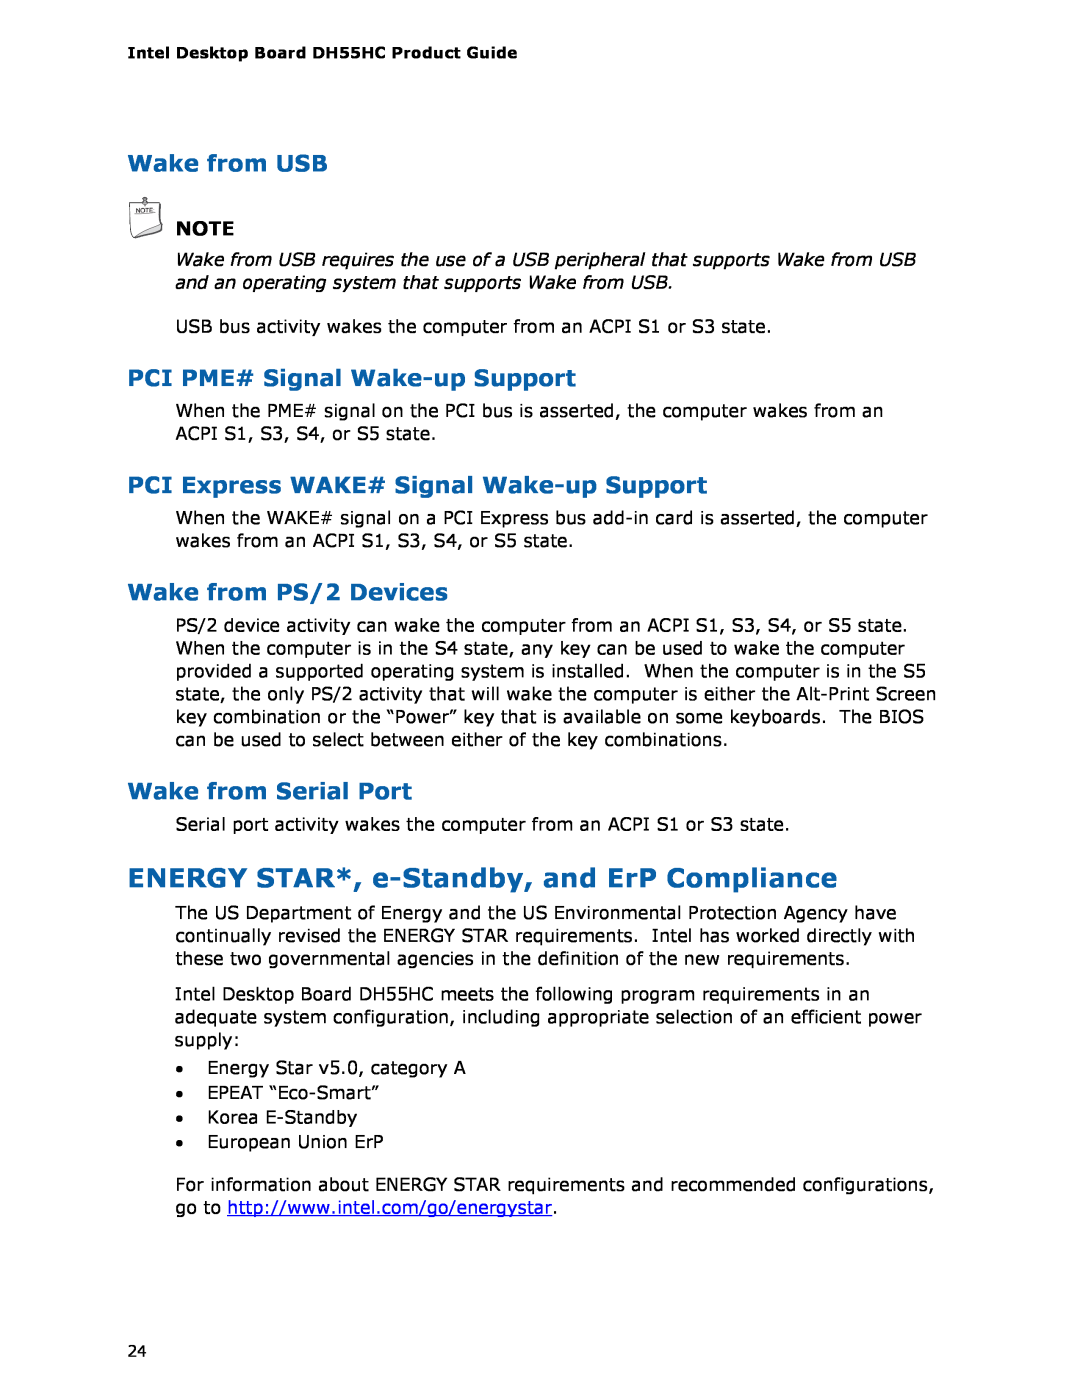 Intel BOXDH55HC manual ENERGY STAR*, e-Standby, and ErP Compliance, Wake from USB, PCI PME# Signal Wake-up Support 